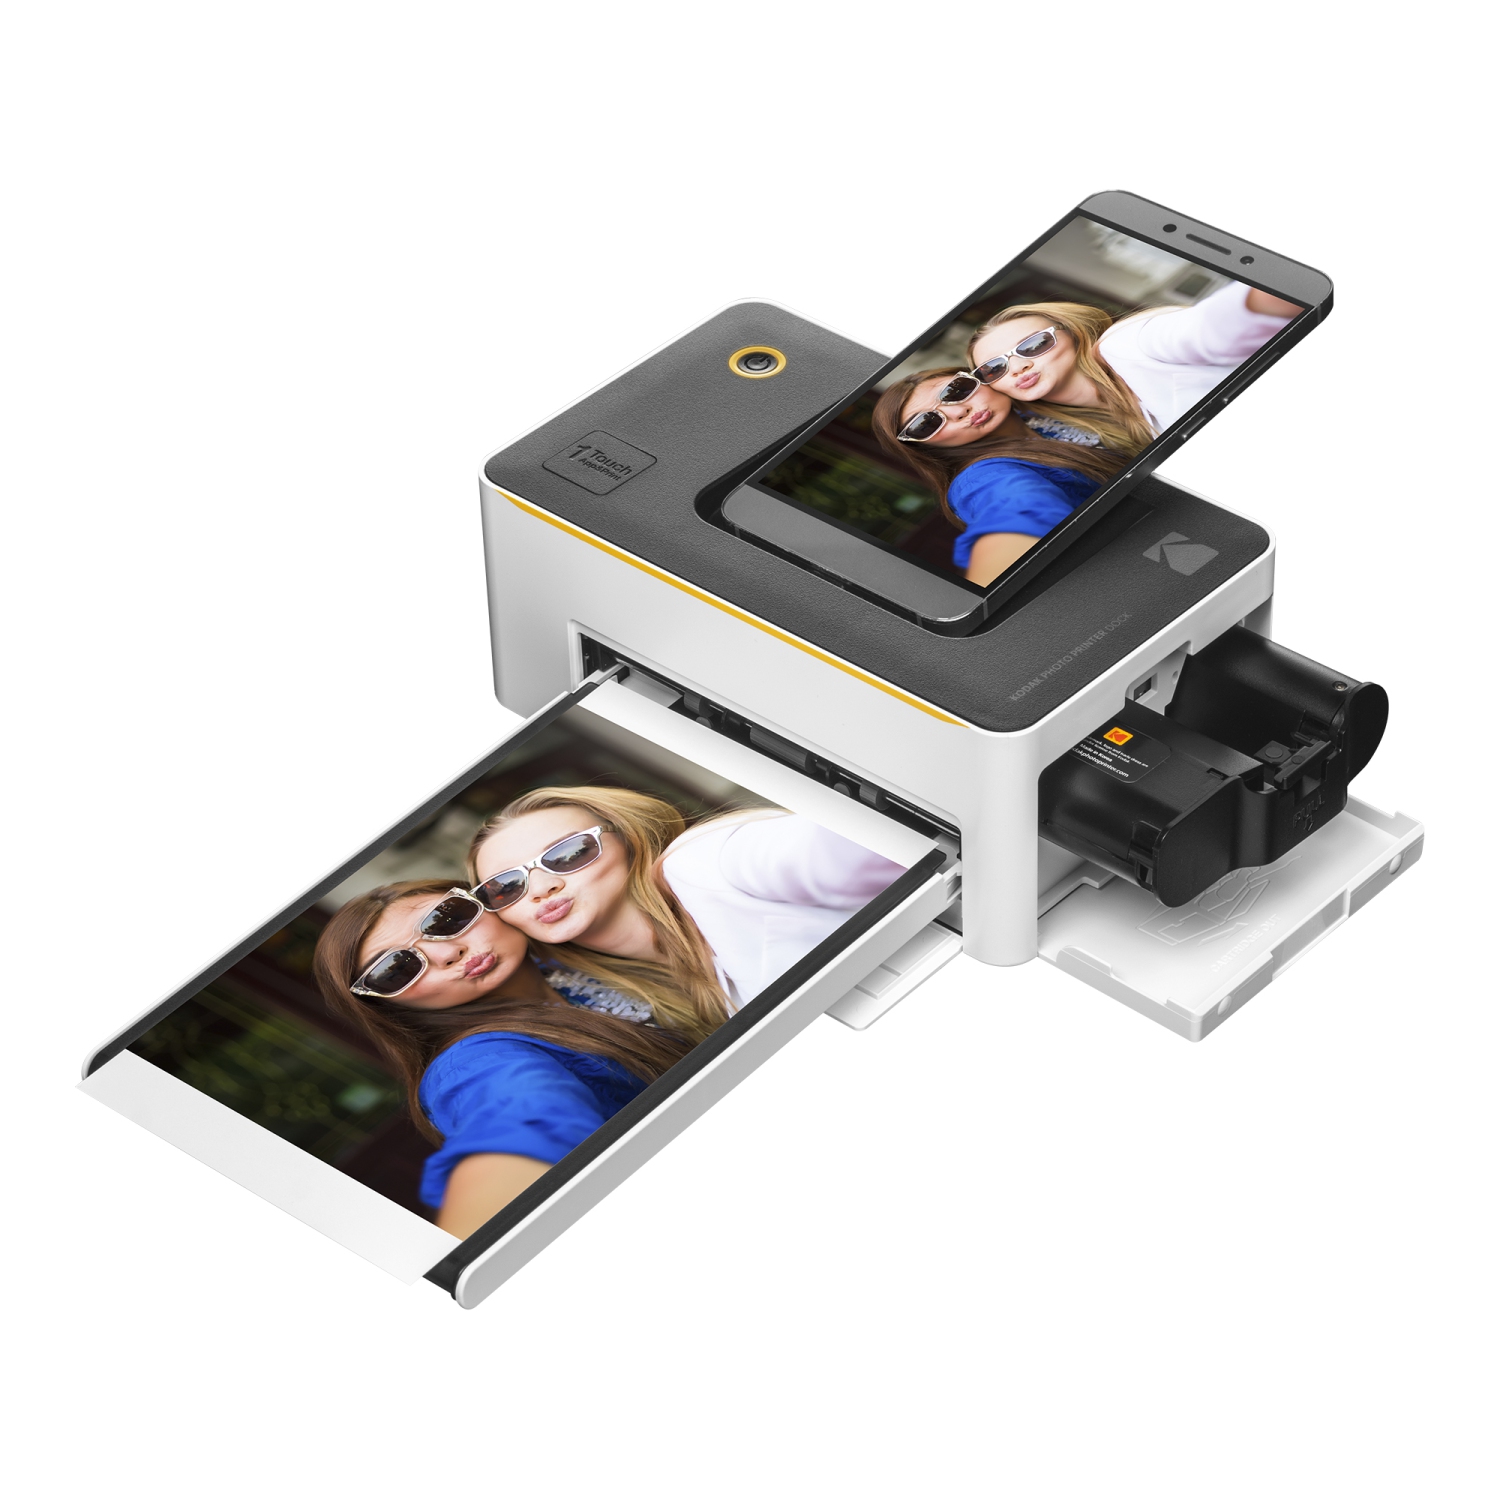 Case Compatible with Kodak Dock Plus/ Kodak Dock Wi-Fi Portable 4x6” Instant Photo Printer Printer Paper Box Only Power Cord and Accessories Cartridge Bluetooth Photo Printing Holder for Adapter 